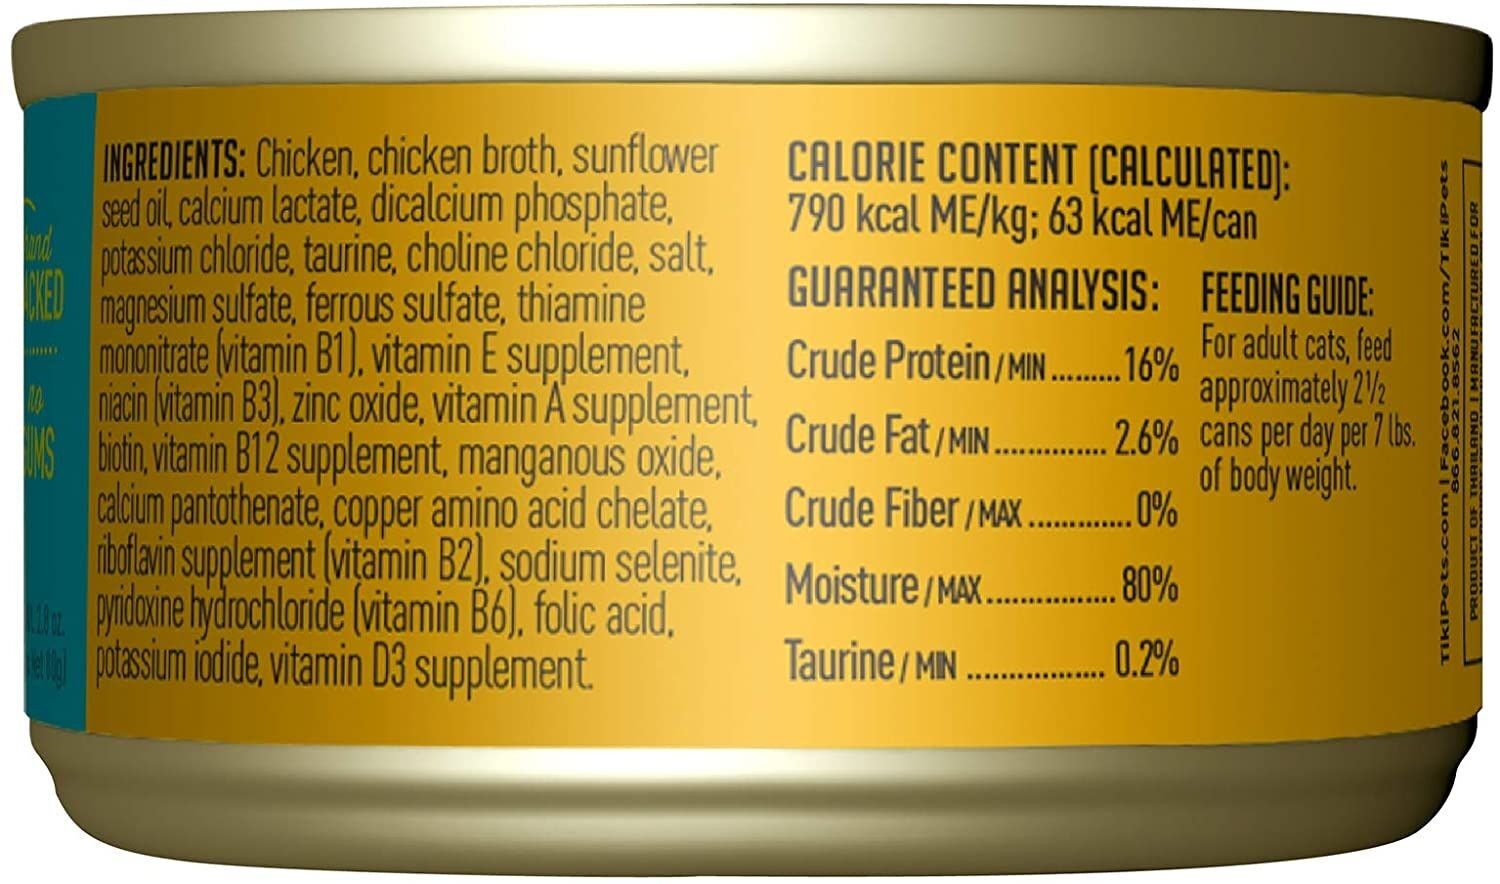 Succulent Chicken In Chicken Consomme Canned Cat Food 2.8 oz